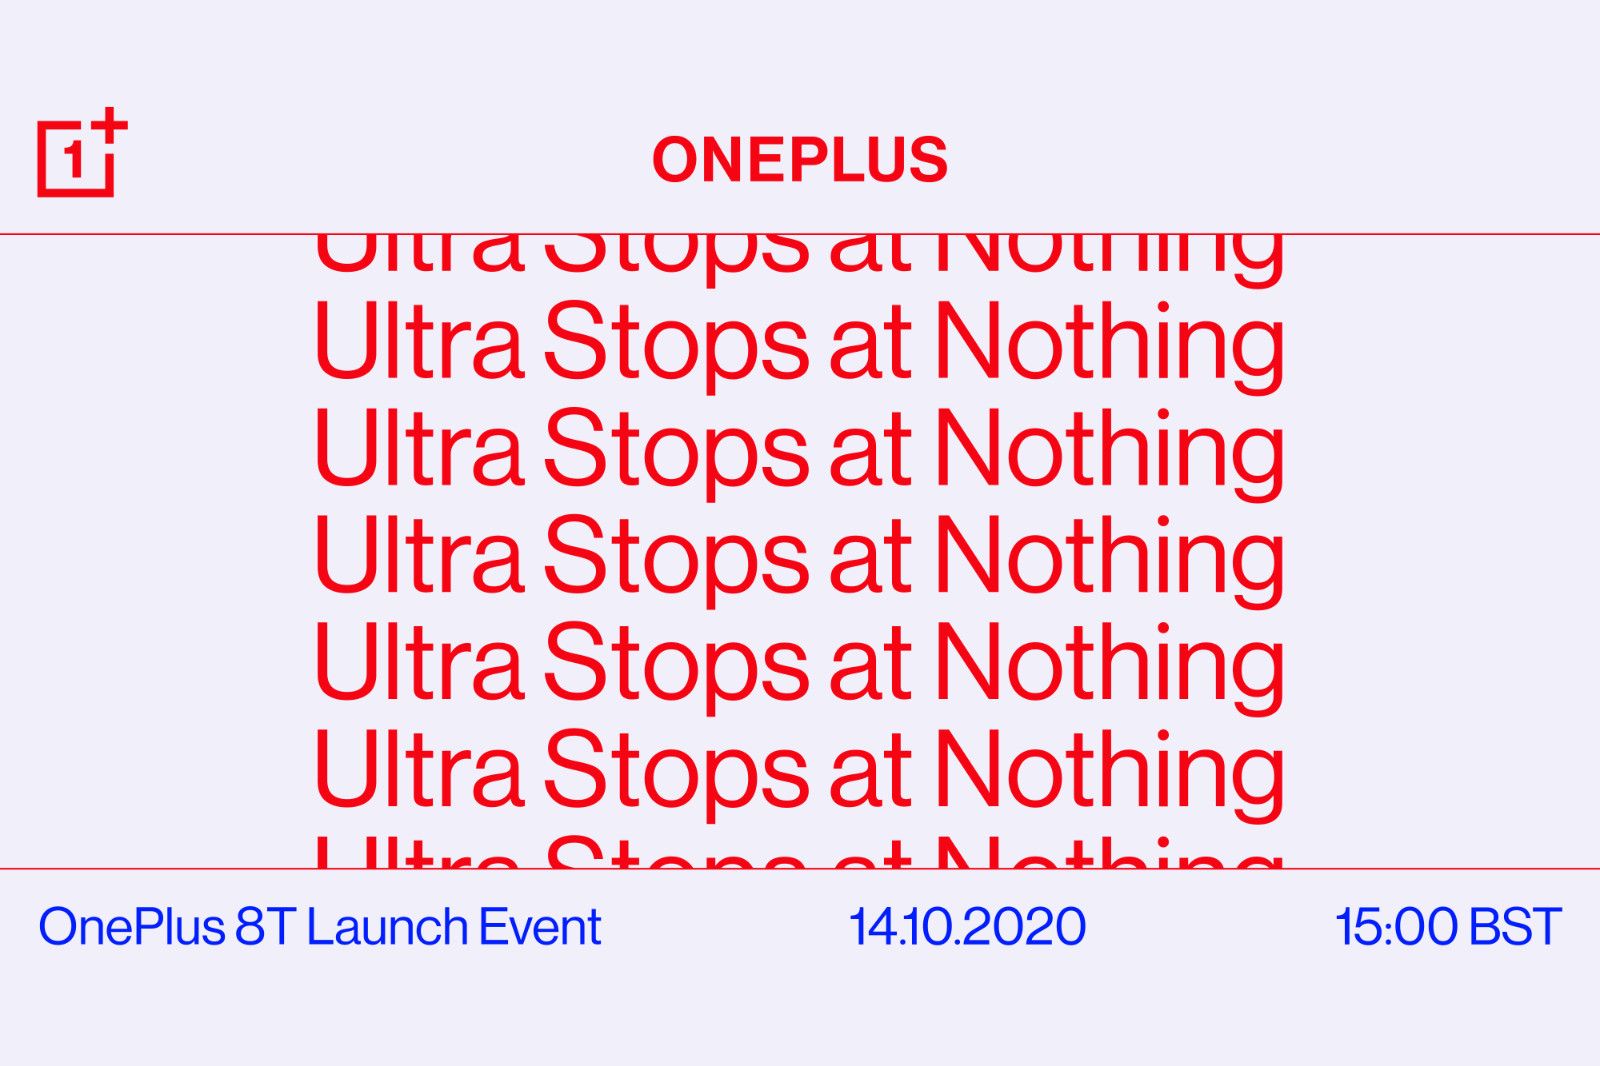 OnePlus 8T coming soon, says OnePlus India photo 2